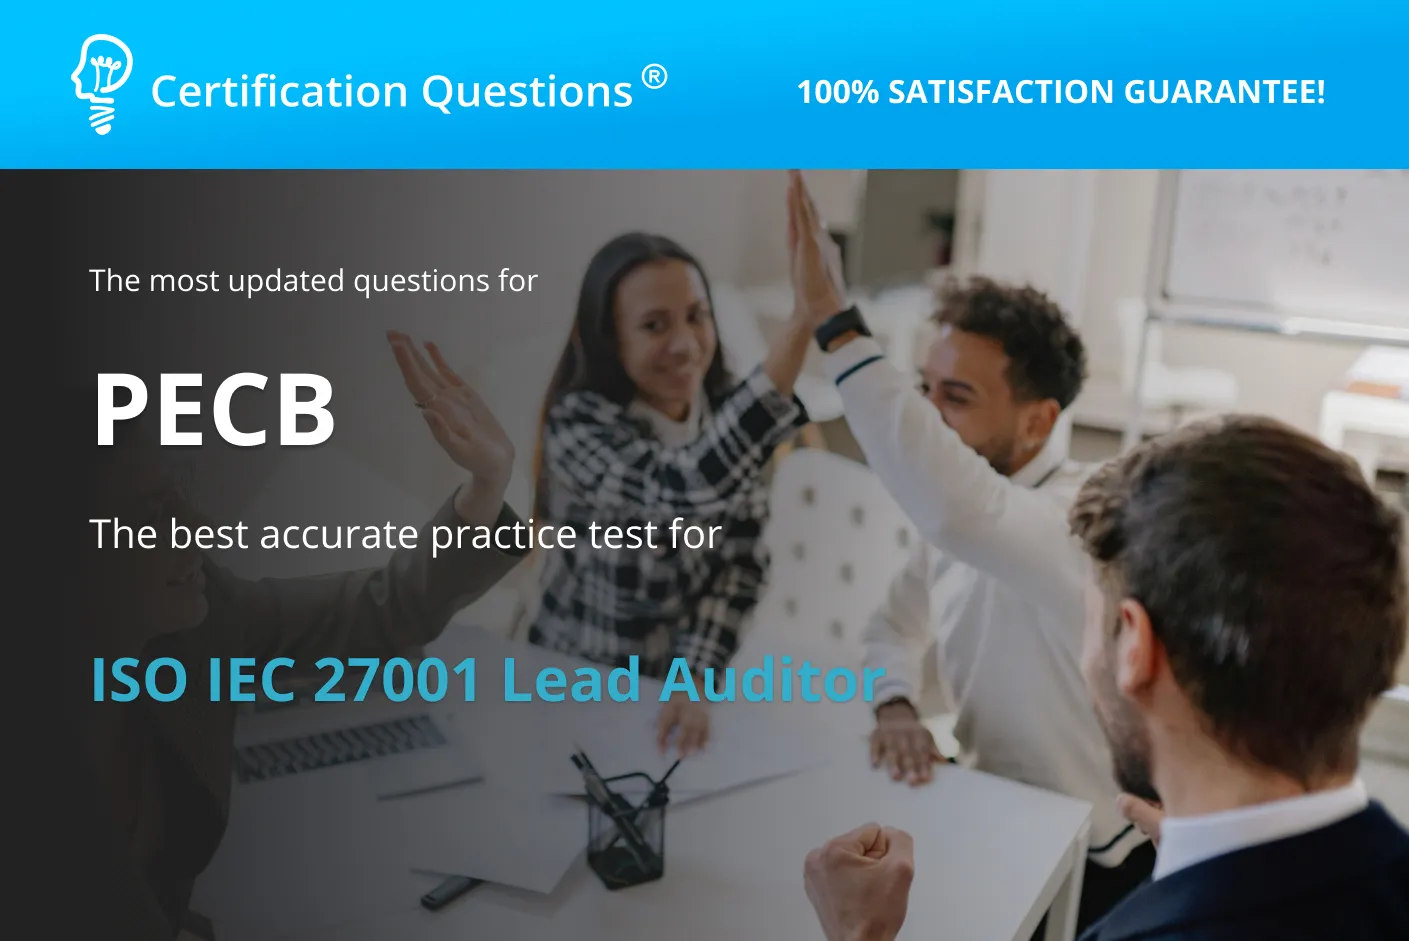 This image is related to ISO 27001 exam questions in USA